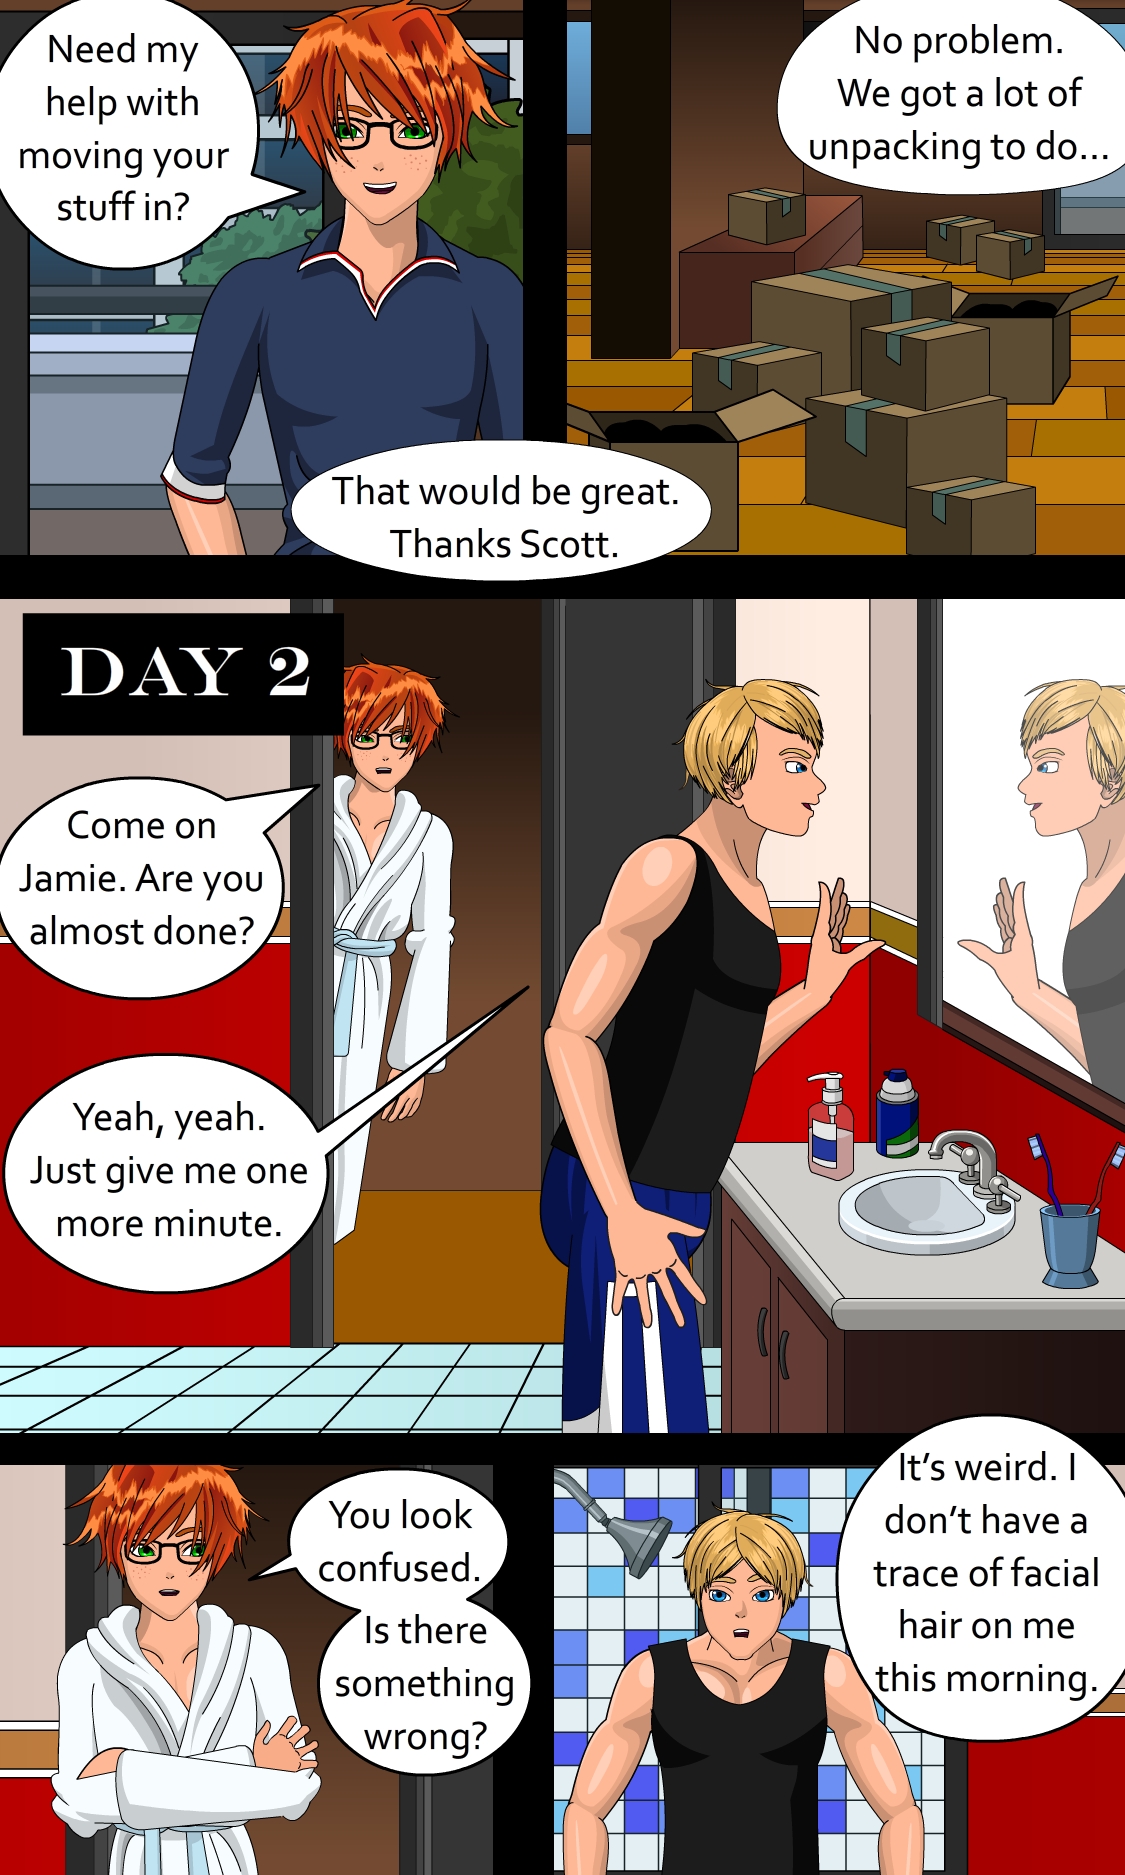 Shifting Roommates Page 4. Posts by SapphireFoxx. 